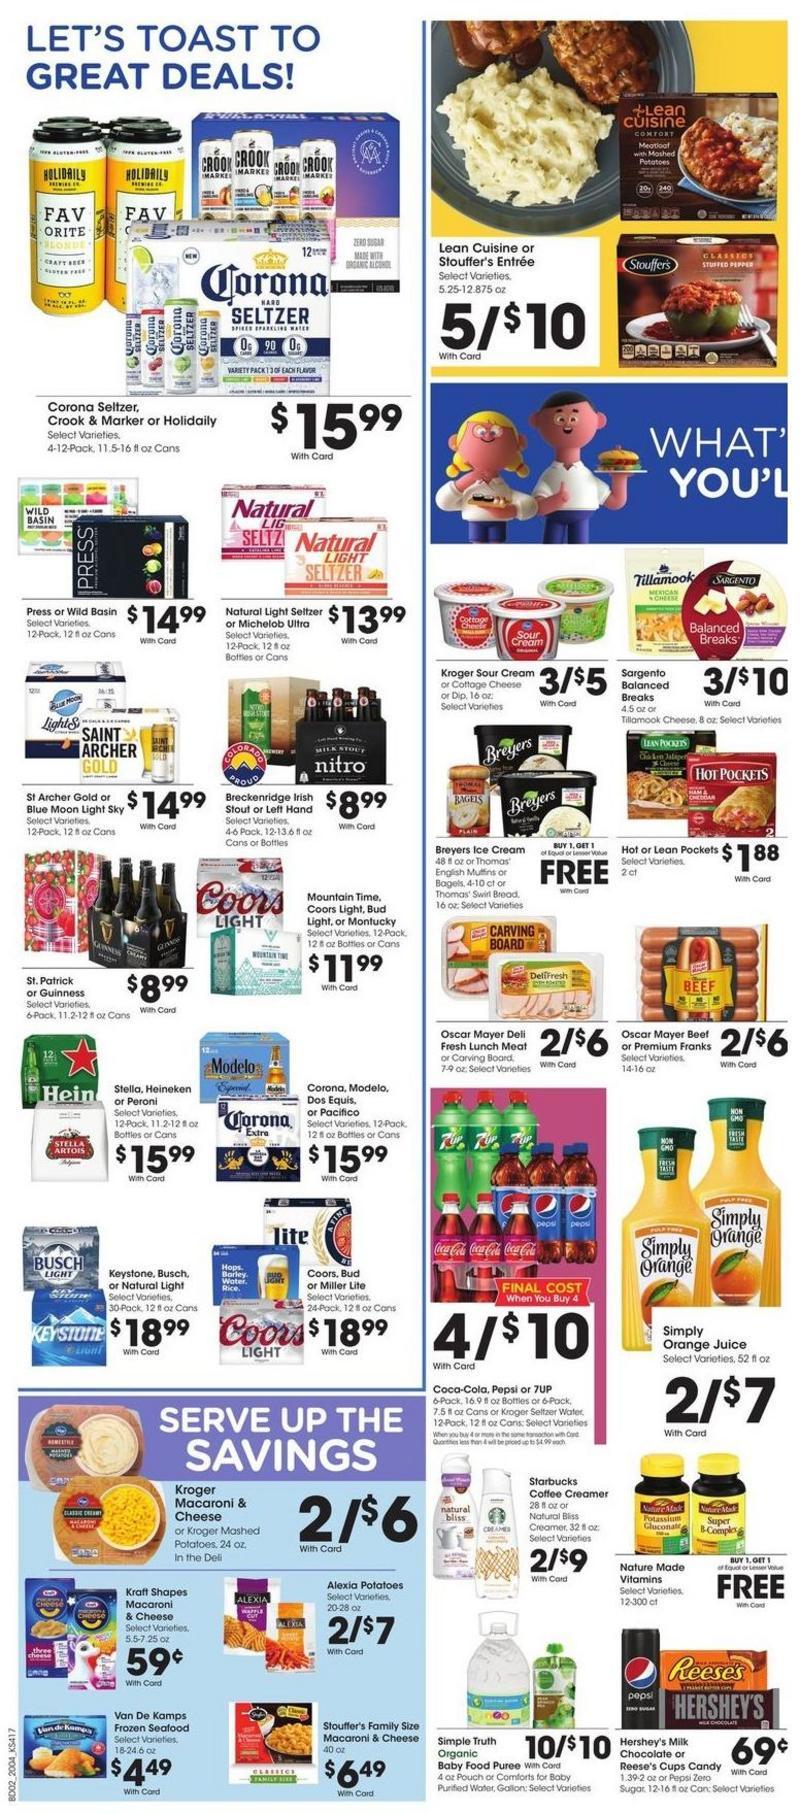 City Market Weekly Ad from February 26